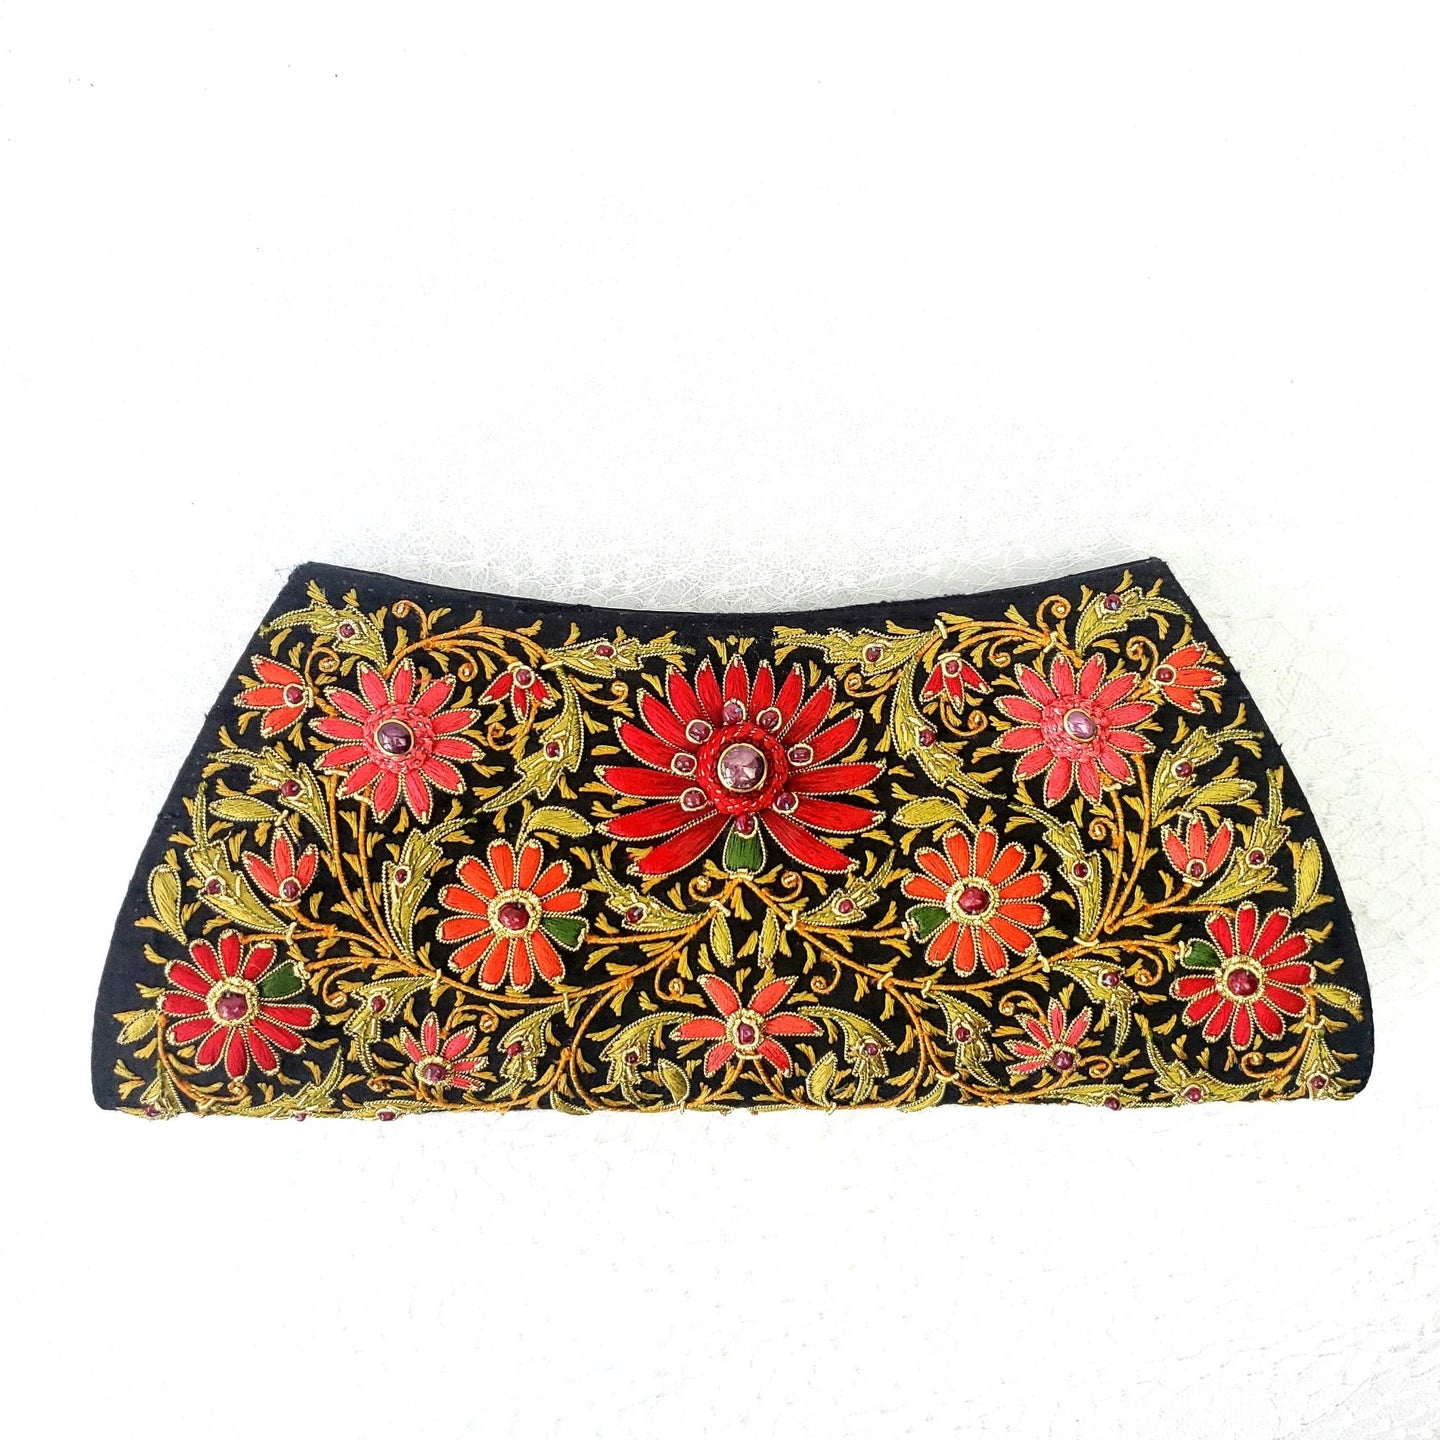 Luxury embroidered red floral silk evening clutch bag on black silk and embellished with star ruby and ruby gemstones, zardozi clutch.